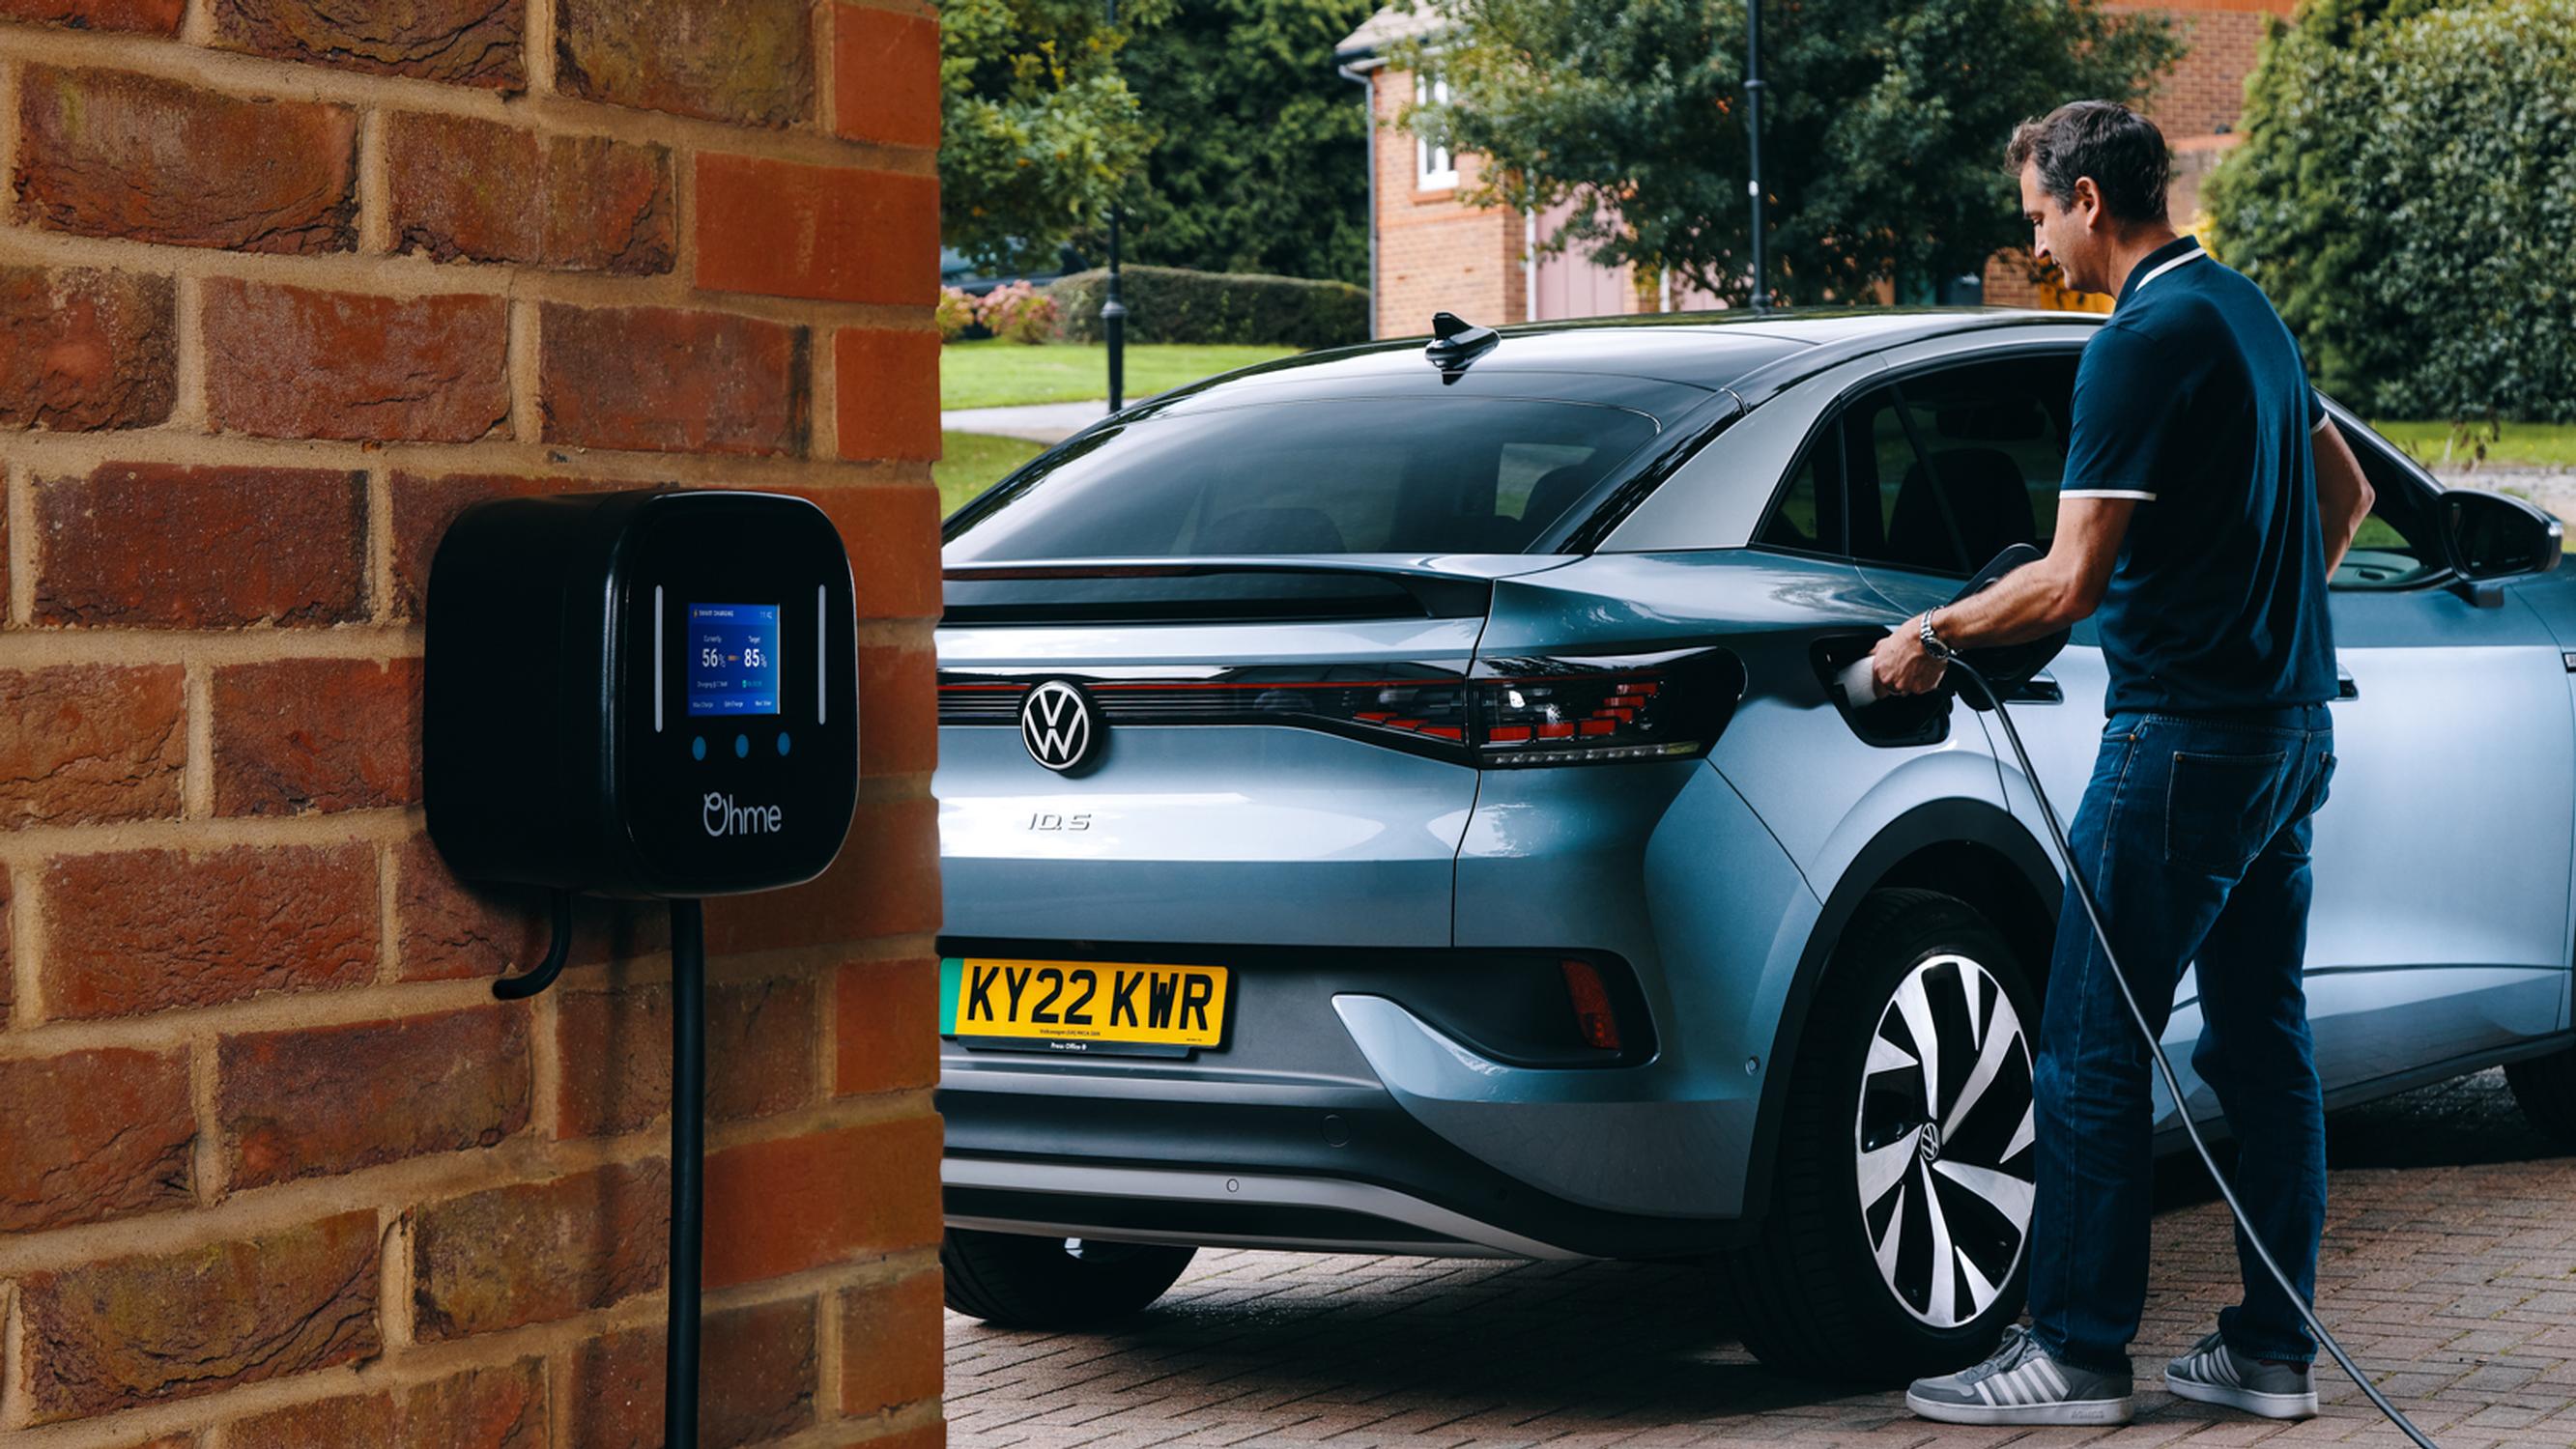 EV chargers must comply with new regulations, says Ohme